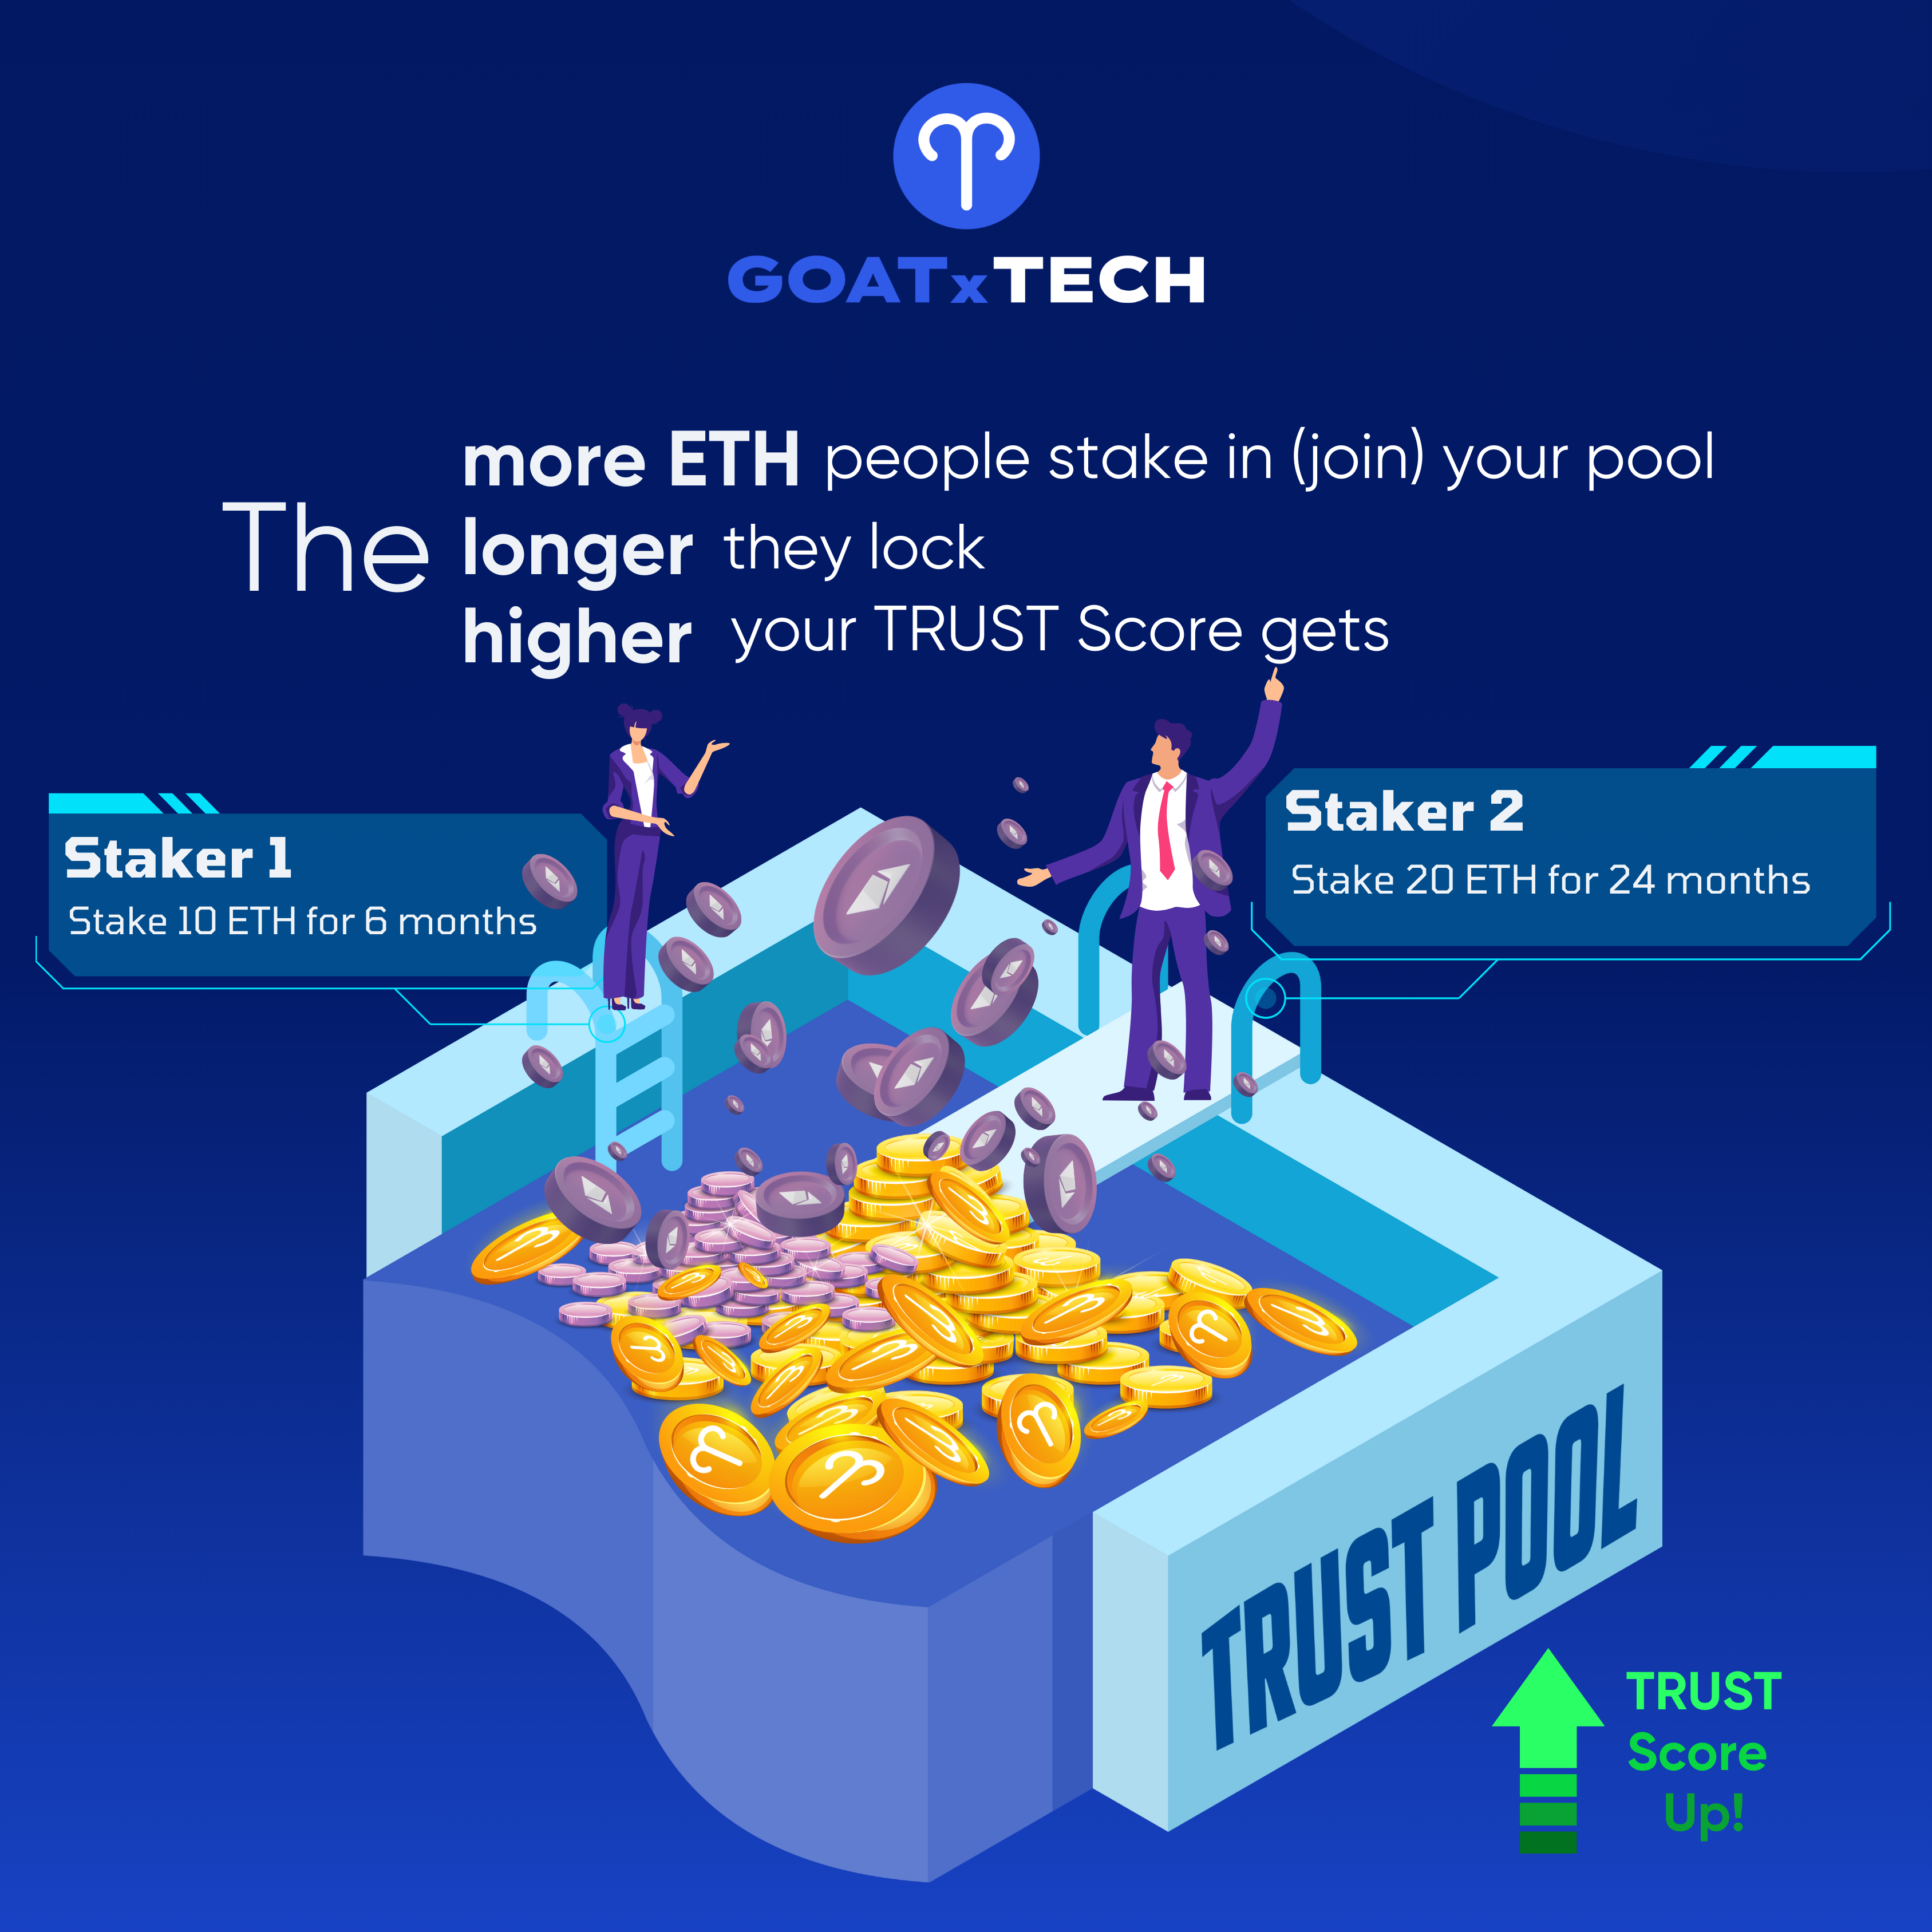 The more ETH people stake in (join) your pool, and the longer they lock their stakes, the higher your Trust Score gets